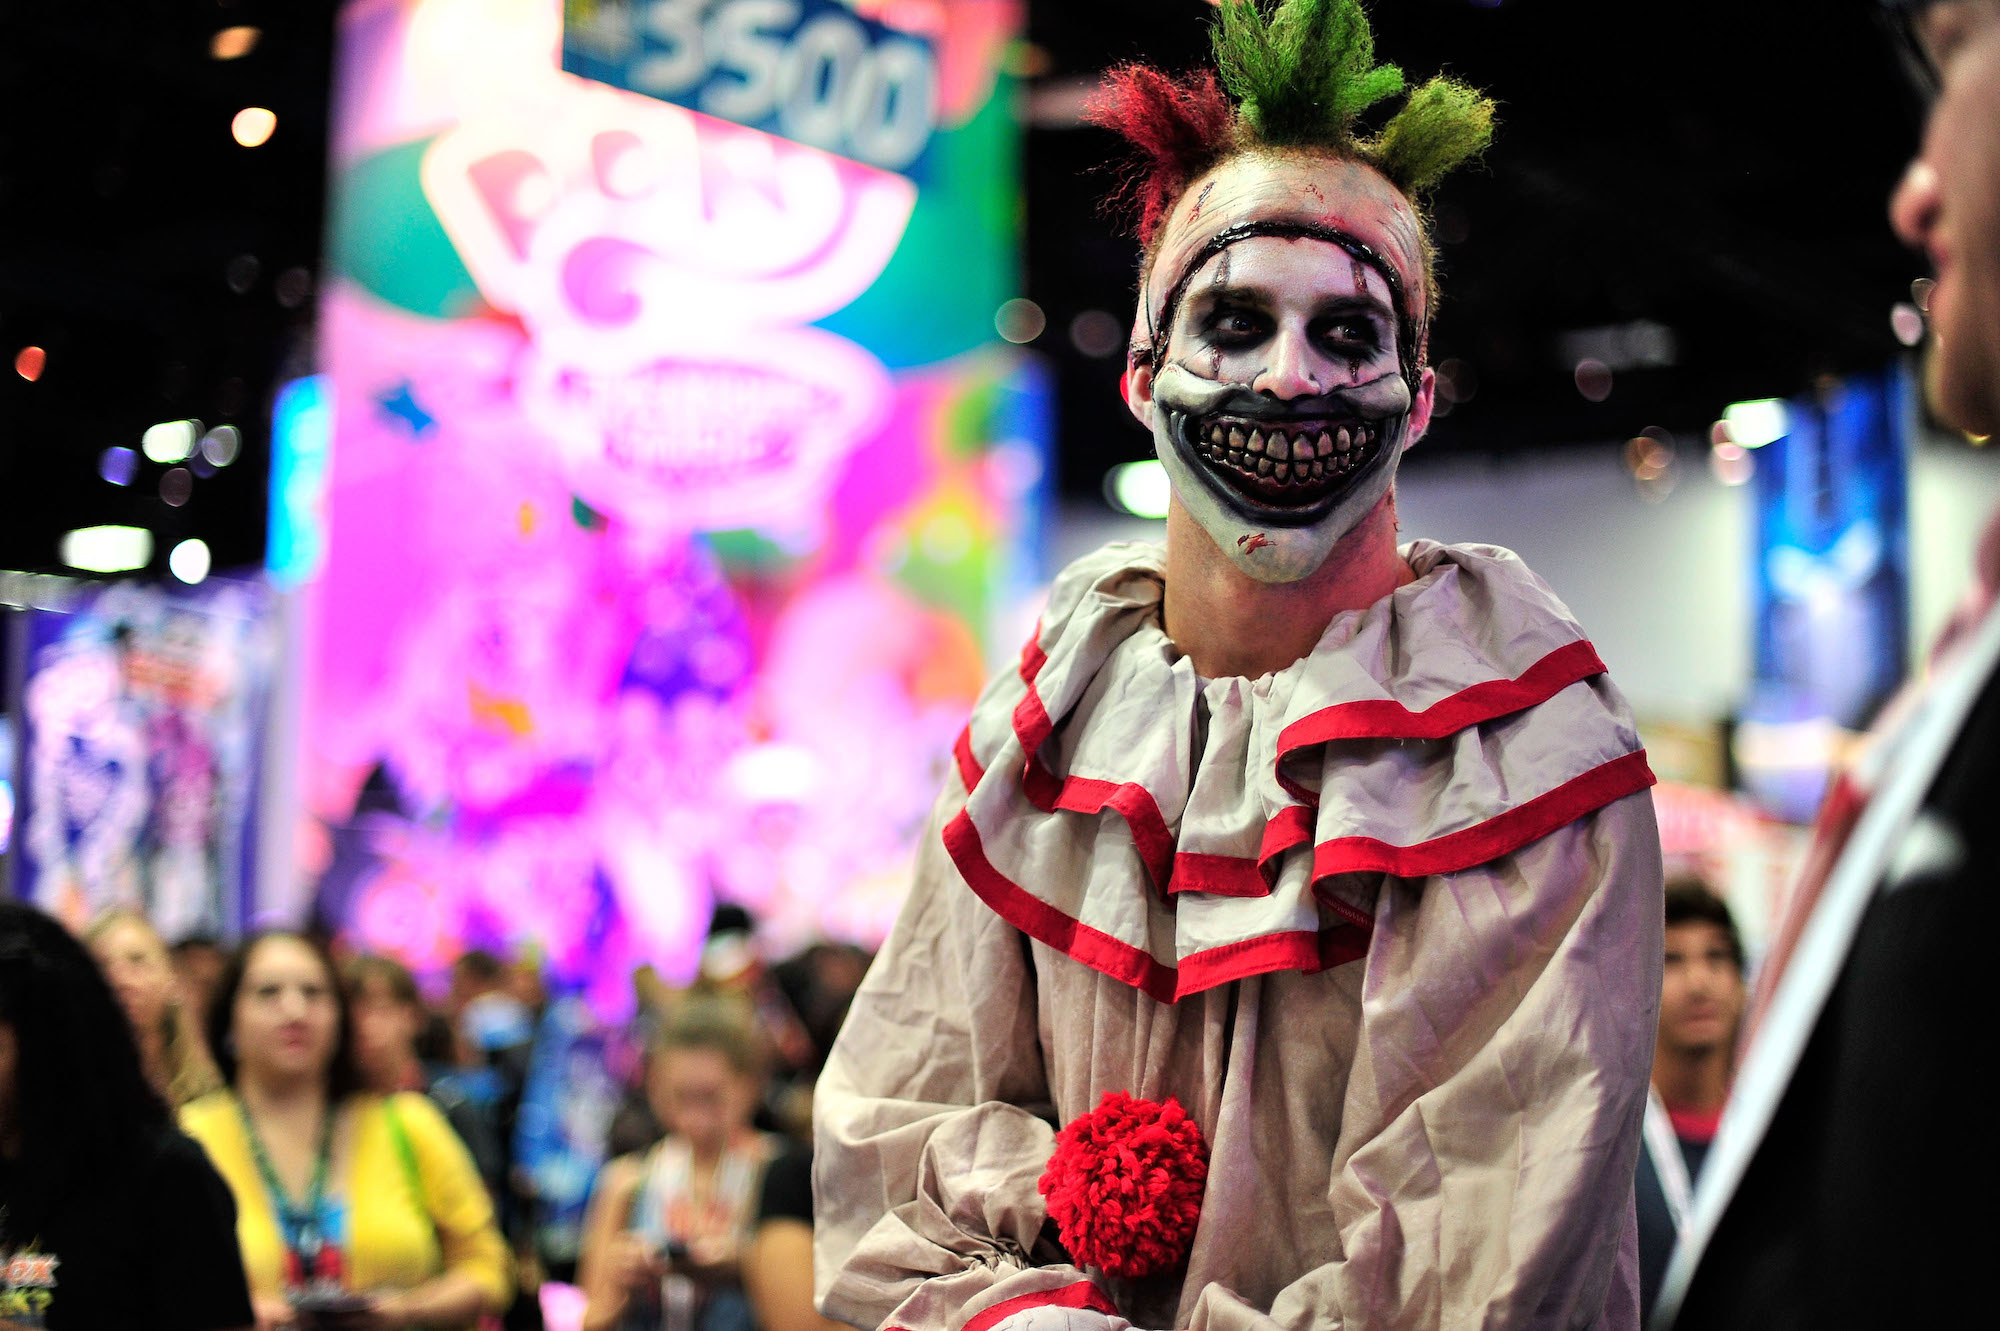 Twisty the Clown from 'American Horror Story' at Comic Con